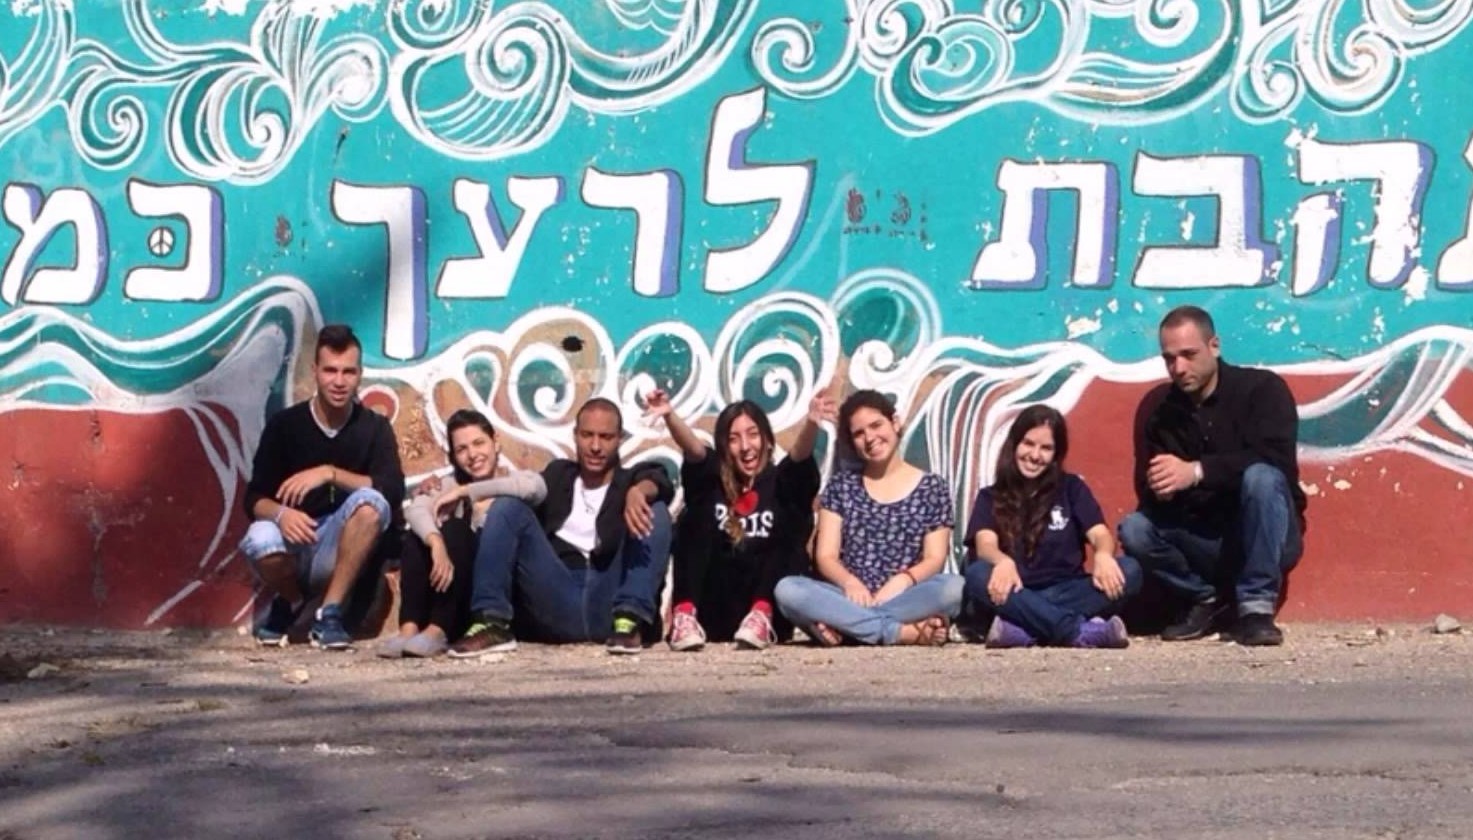 Project encourages mutual knowledge among Arab-Jewish society, in Israel.